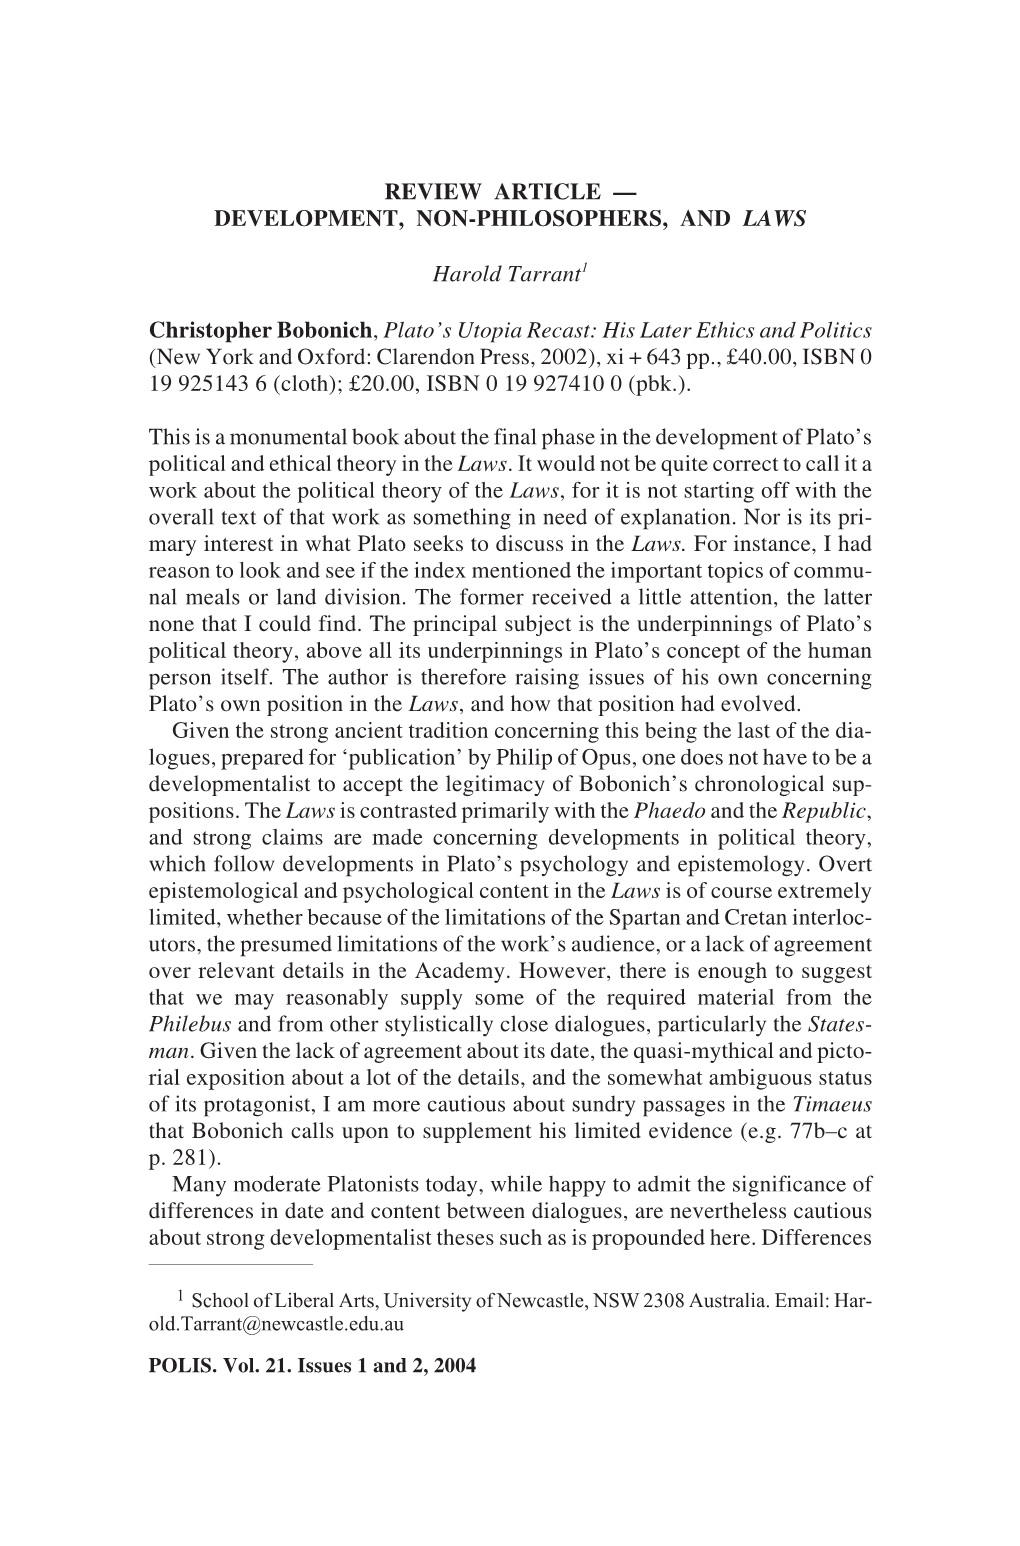 Review Article — Development, Non-Philosophers, and Laws